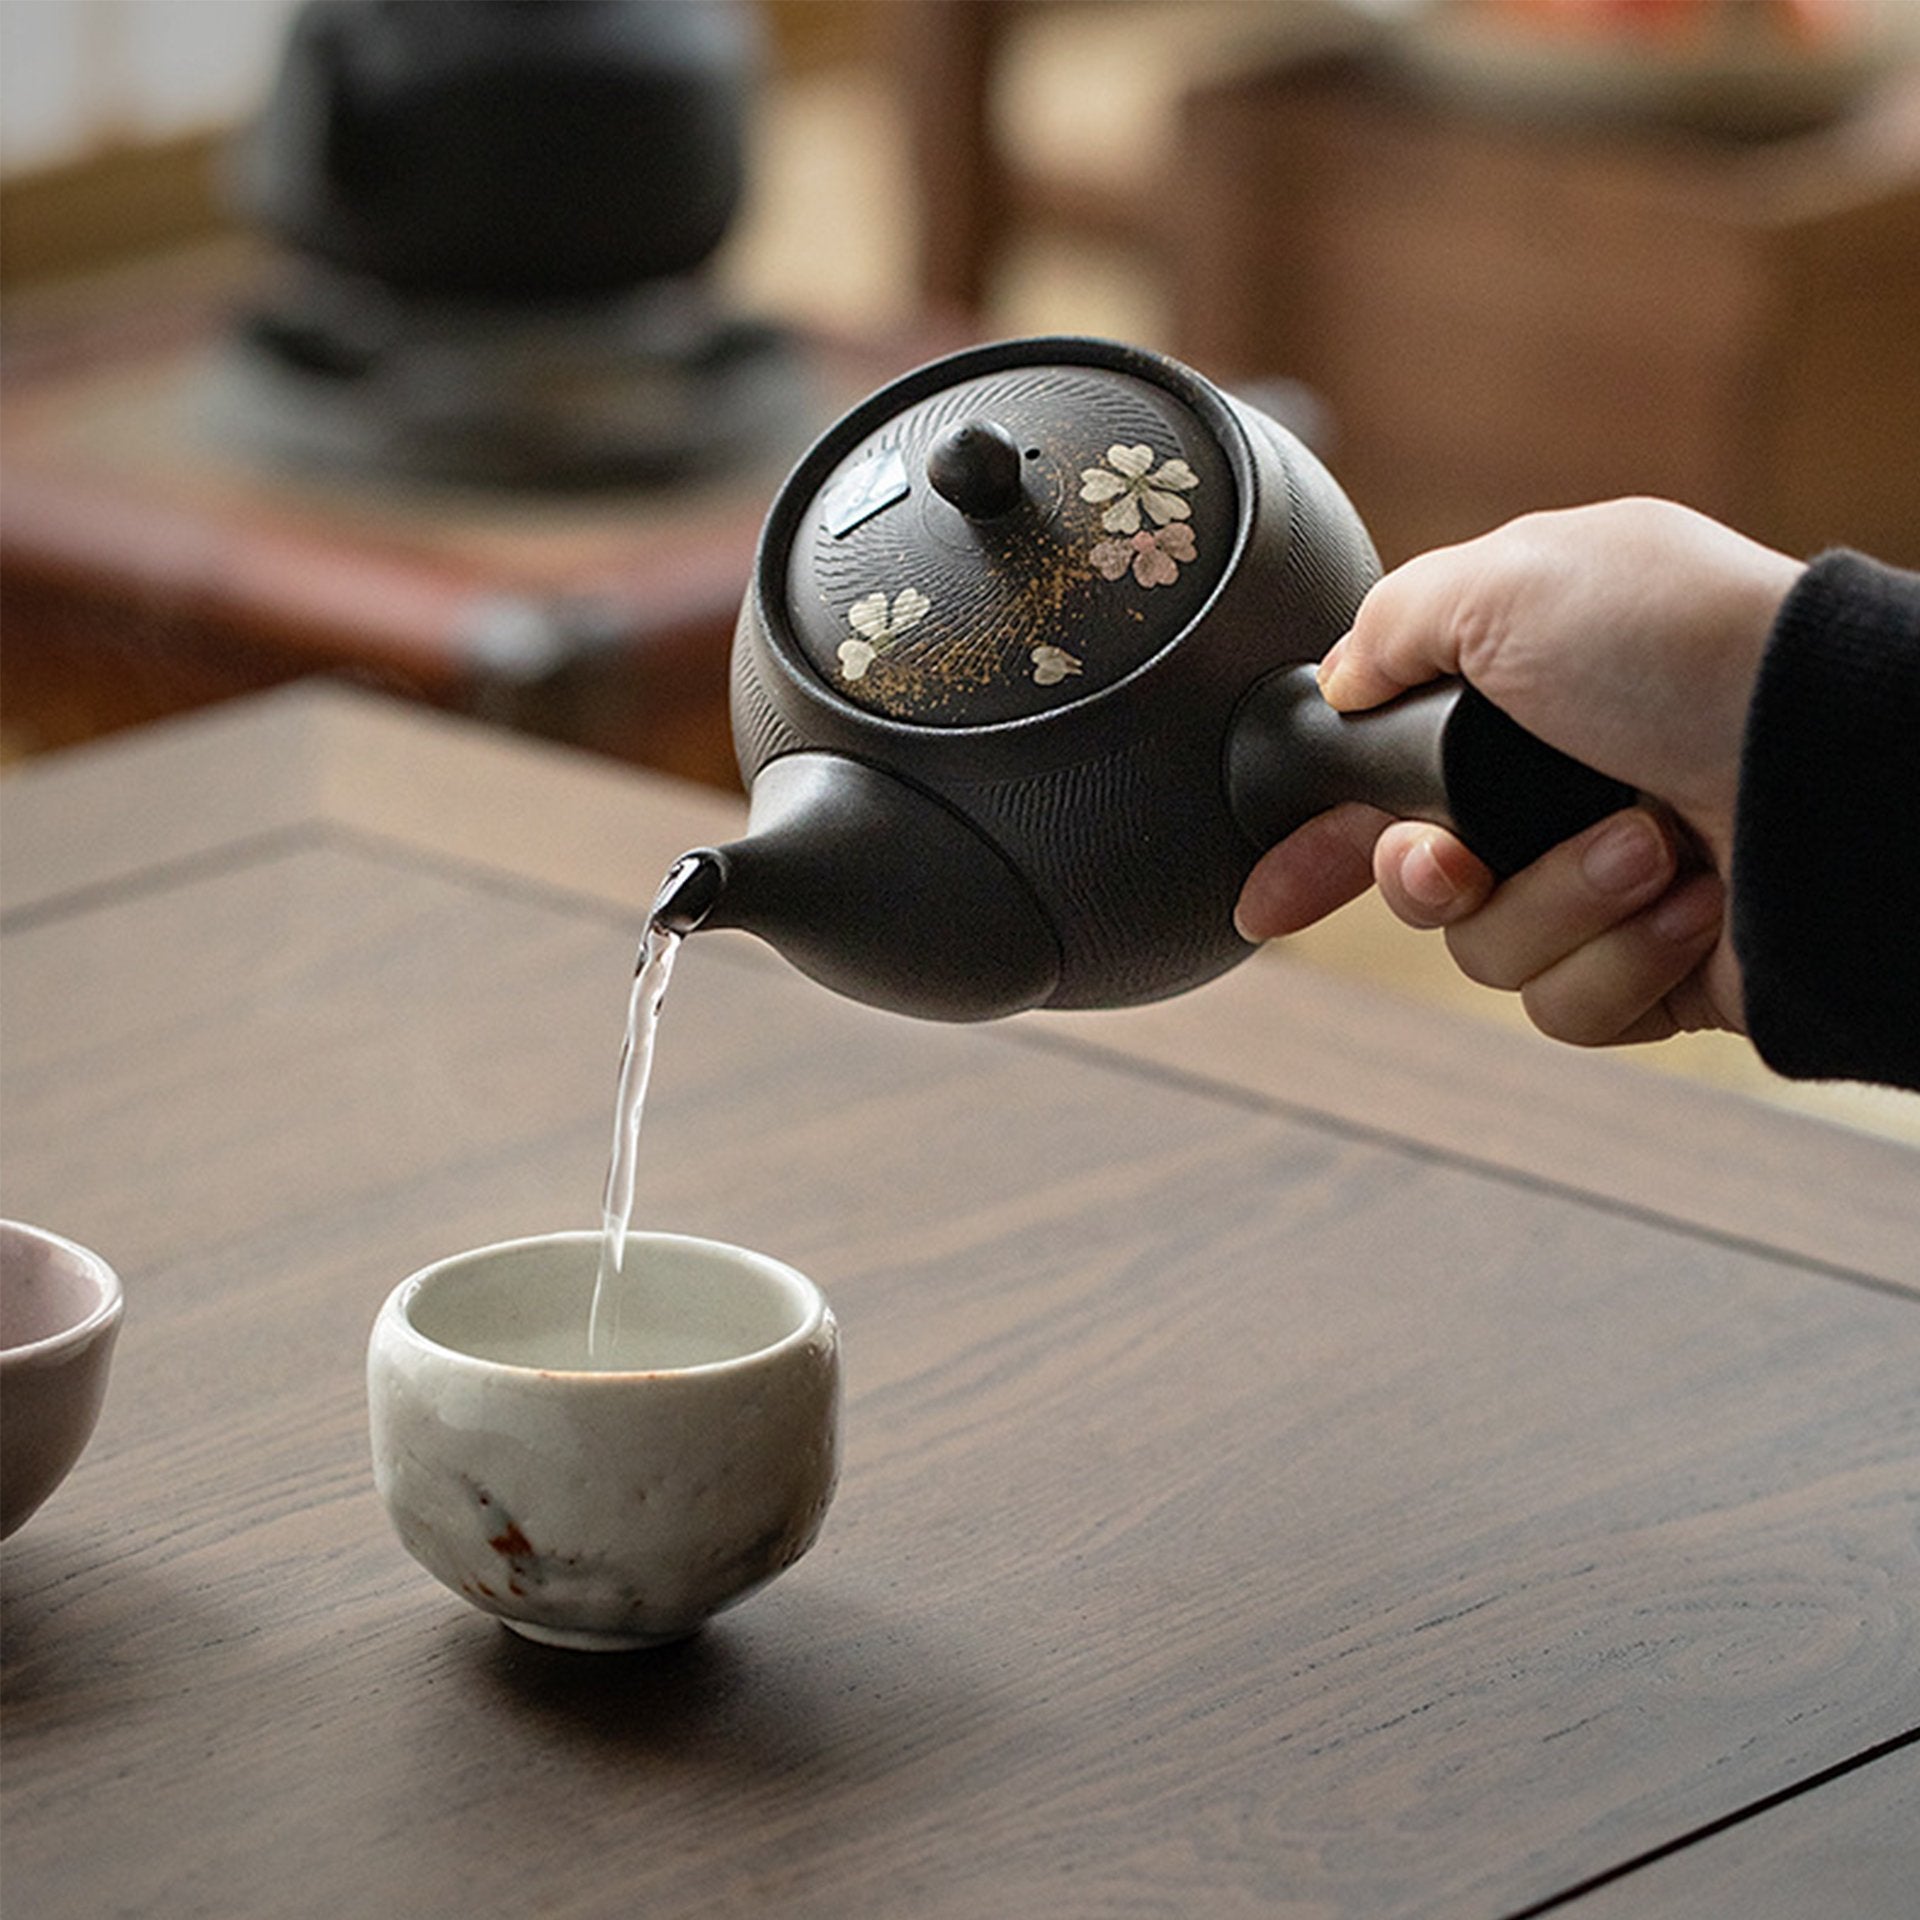 Hand pouring water from a traditional dark teapot into a cup.